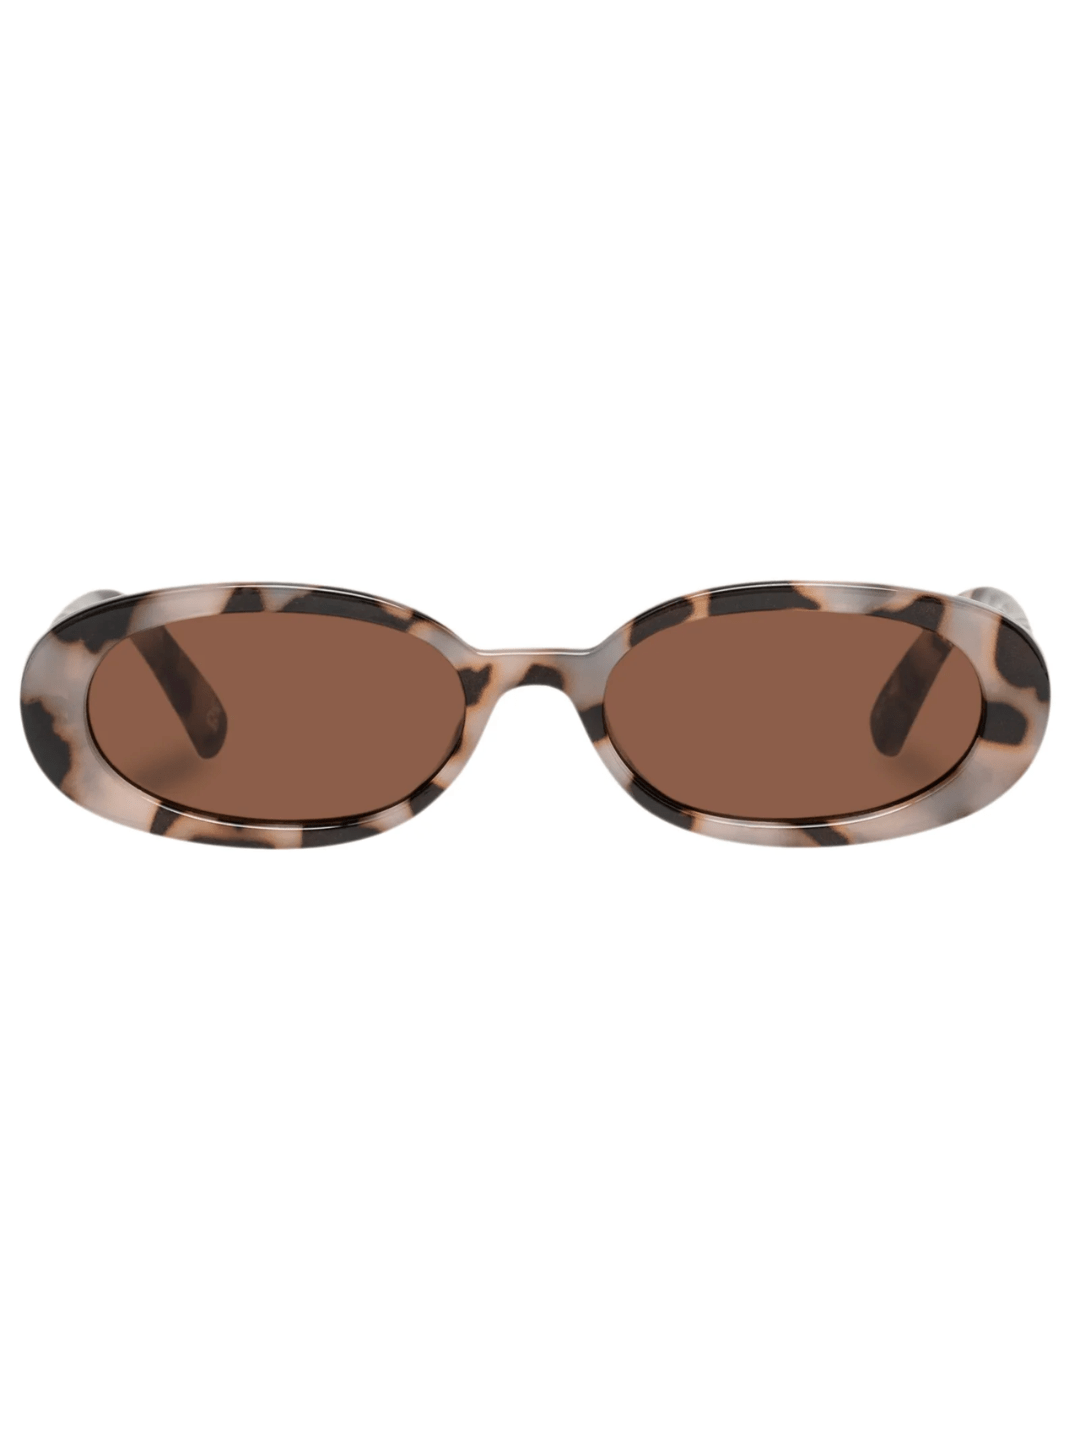 Le Specs Sunglasses Outta Love in Cookie Tort